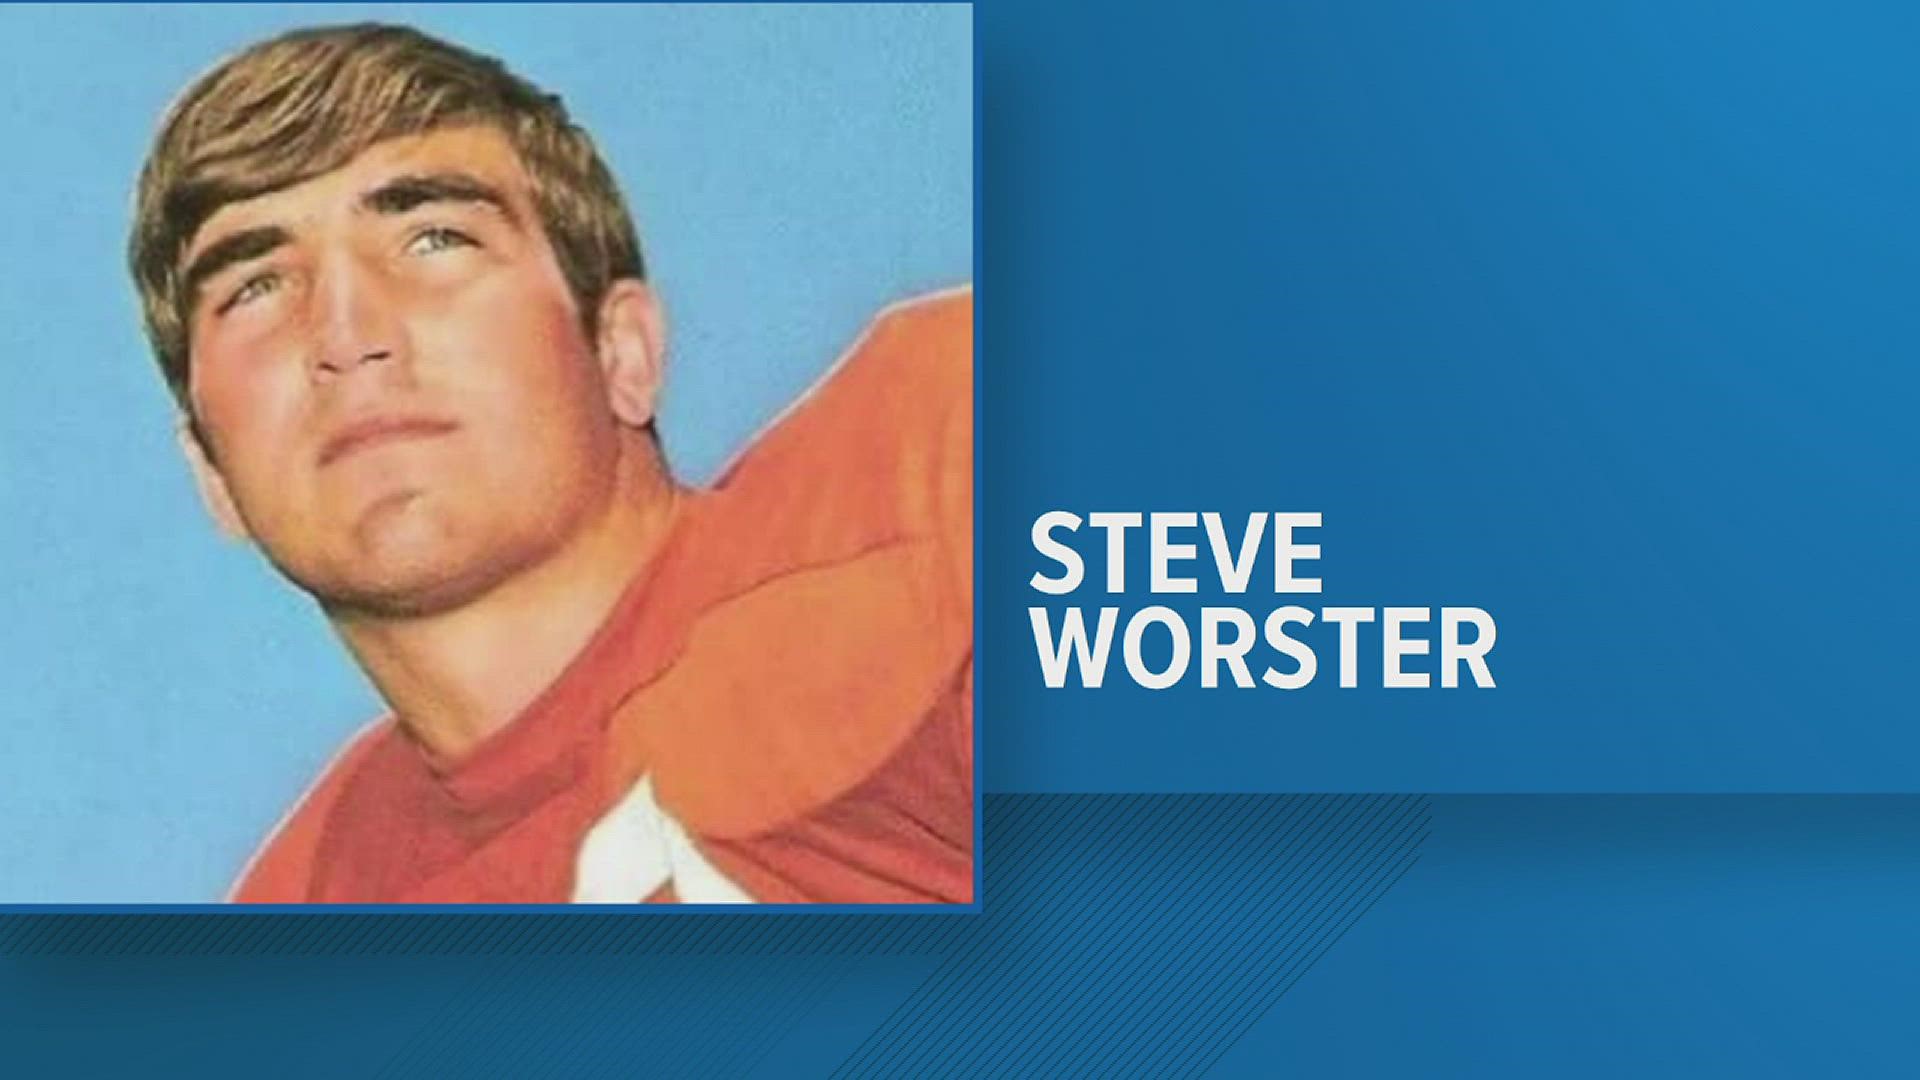 Steve Worster died Saturday night at the age of 73, his son confirmed with 12News.